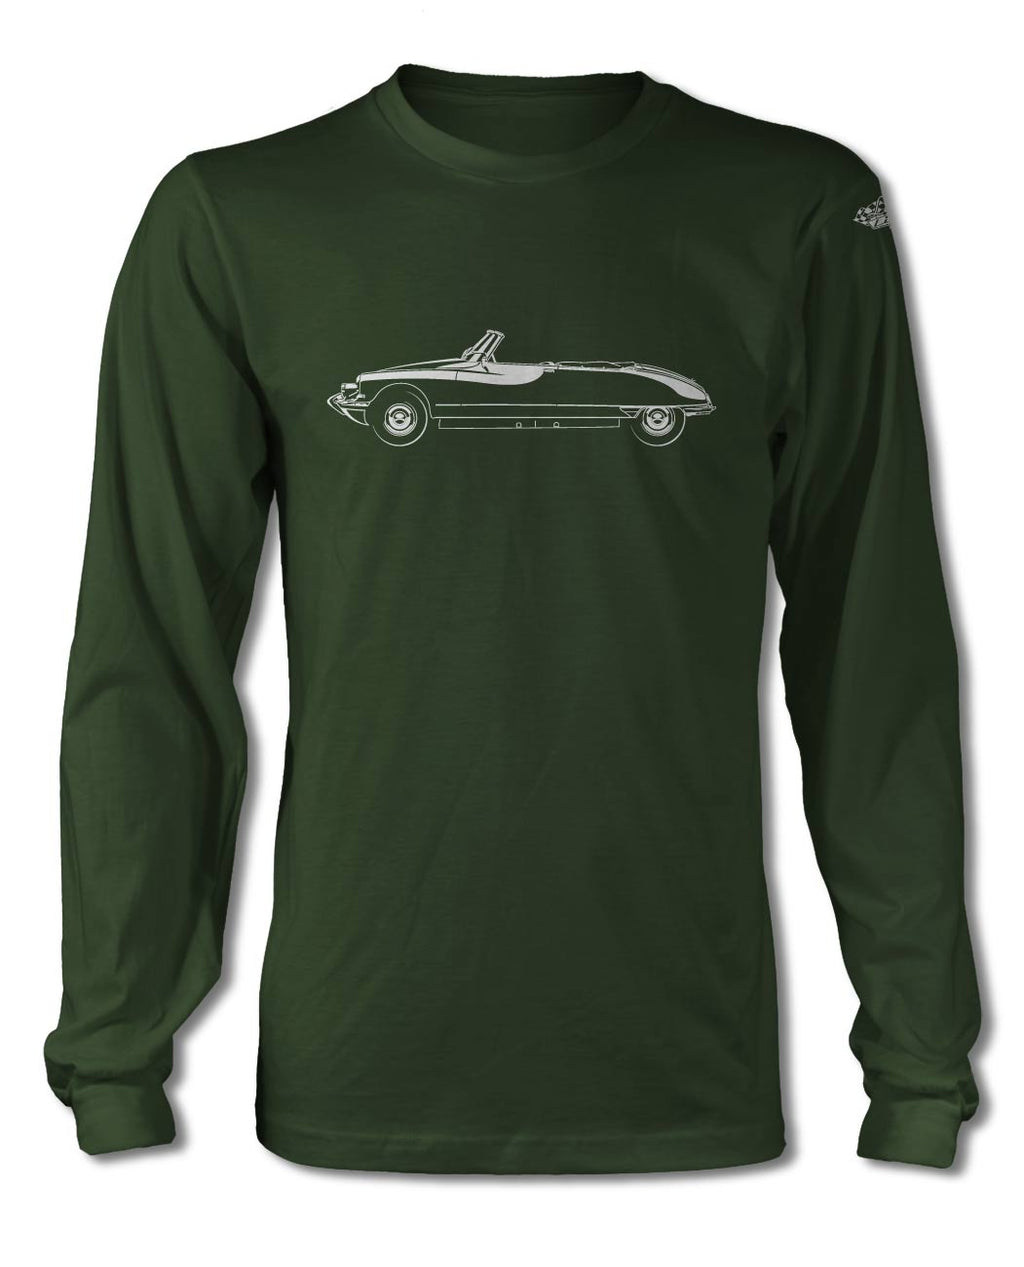 Citroen DS ID 1955 - 1967 Convertible Cabriolet T-Shirt - Long Sleeves - Side View